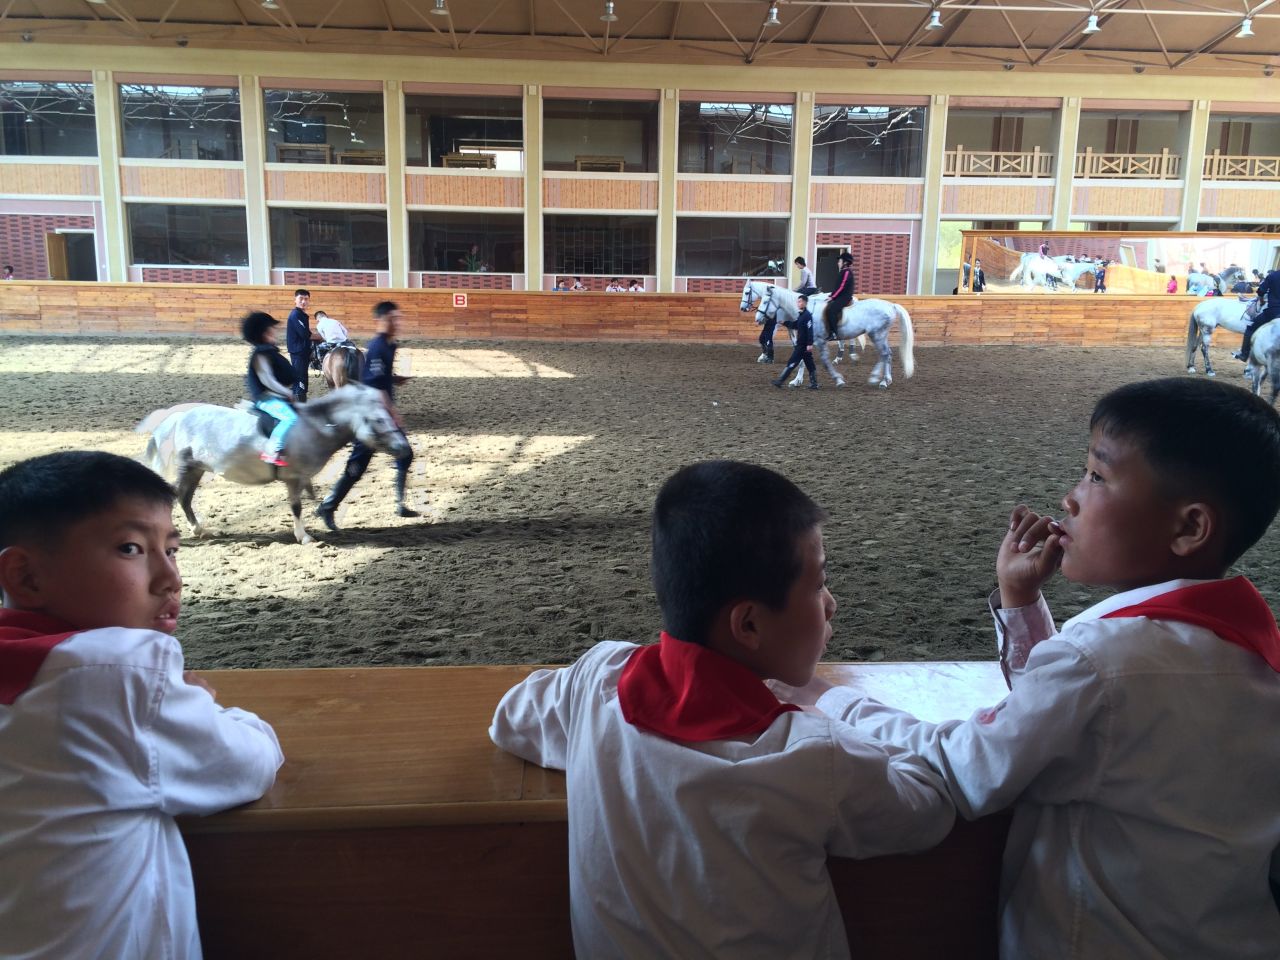 North Korean students watch horse riding lessons at a new equestrian center designed by Supreme Leader Kim Jong Un. The facility was formerly used for military training.